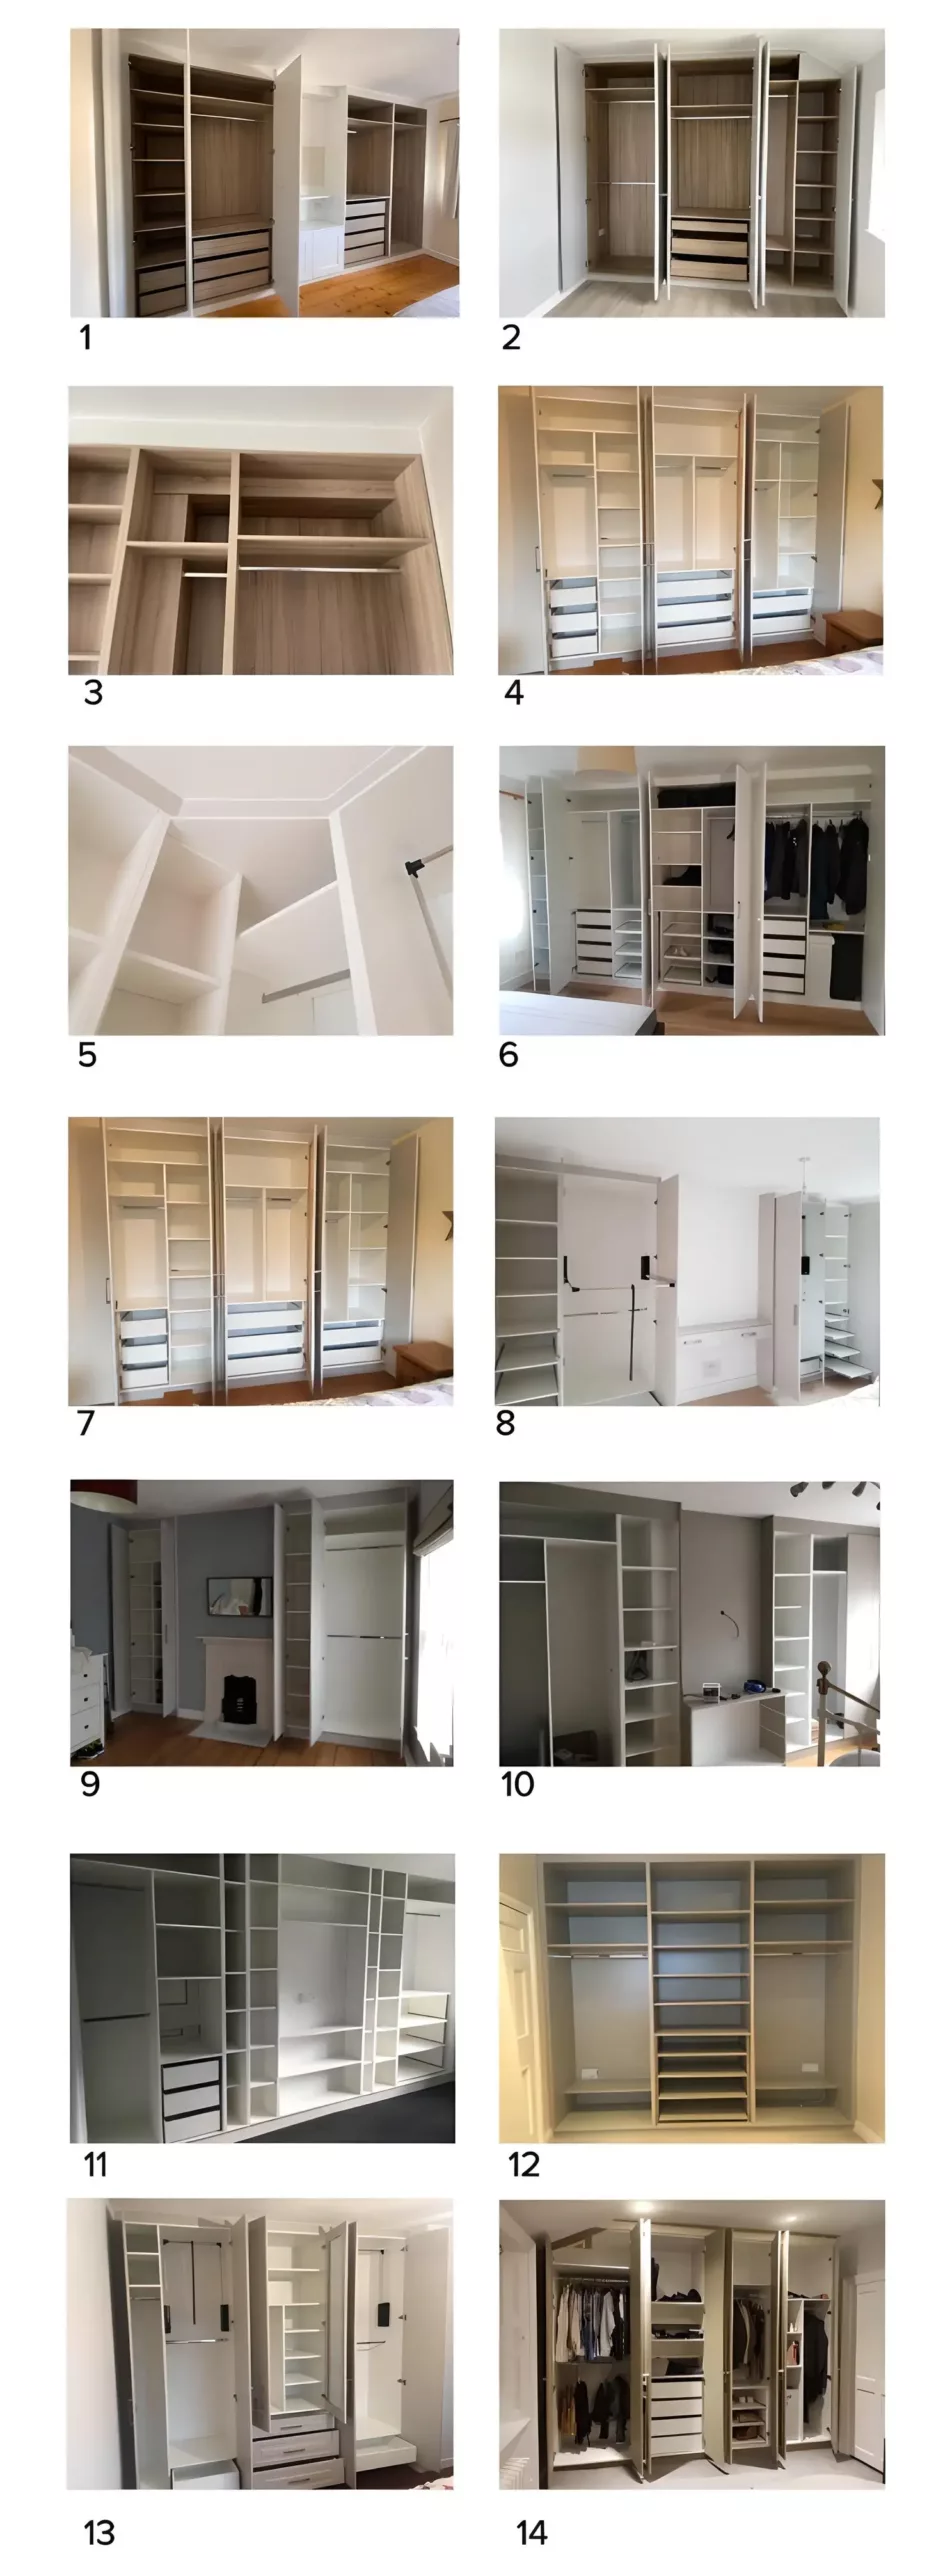 Massive range of options for internal layouts for fitted wardrobes